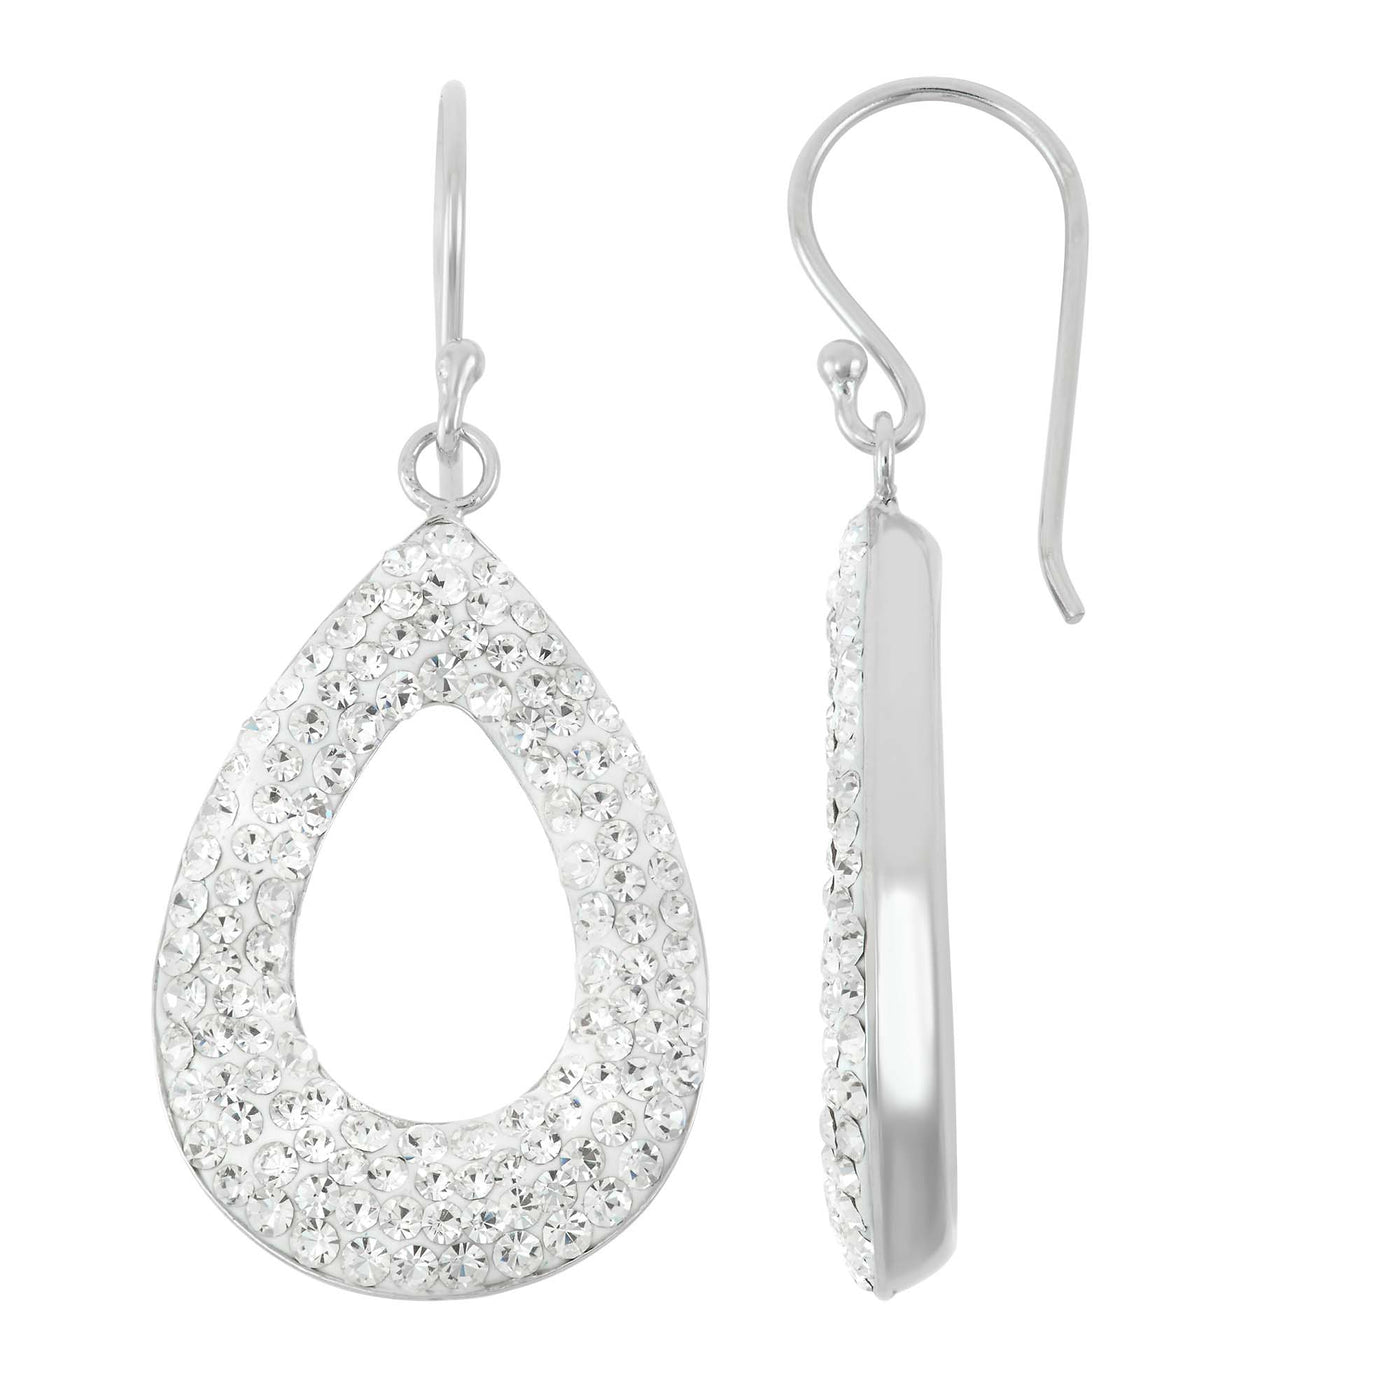 Rebecca Sloane Sterling Silver Earrings Studded White Crystals